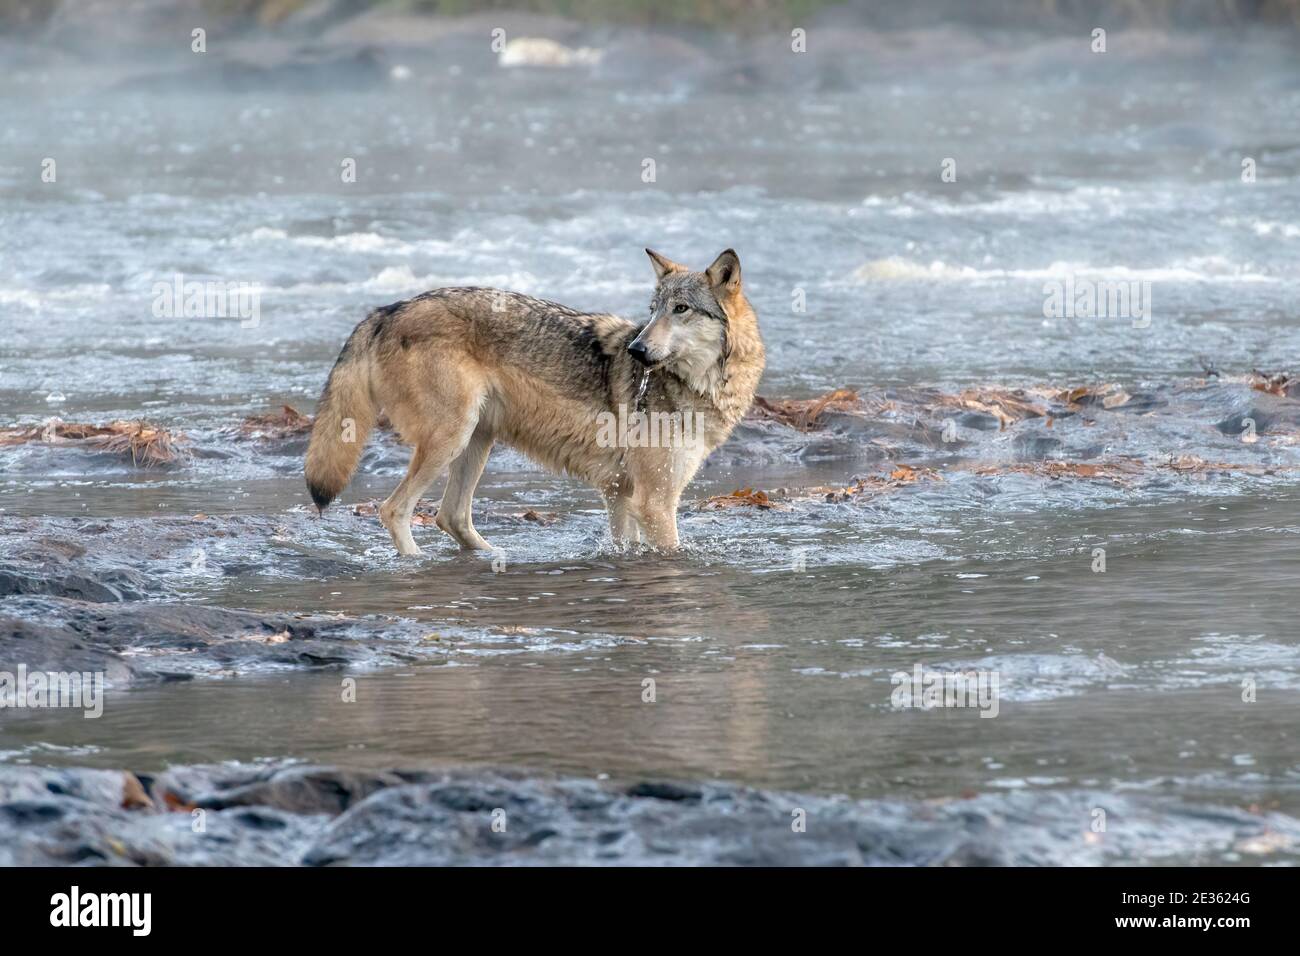 Grey Wolf Drinking from a Misty River Stock Photo